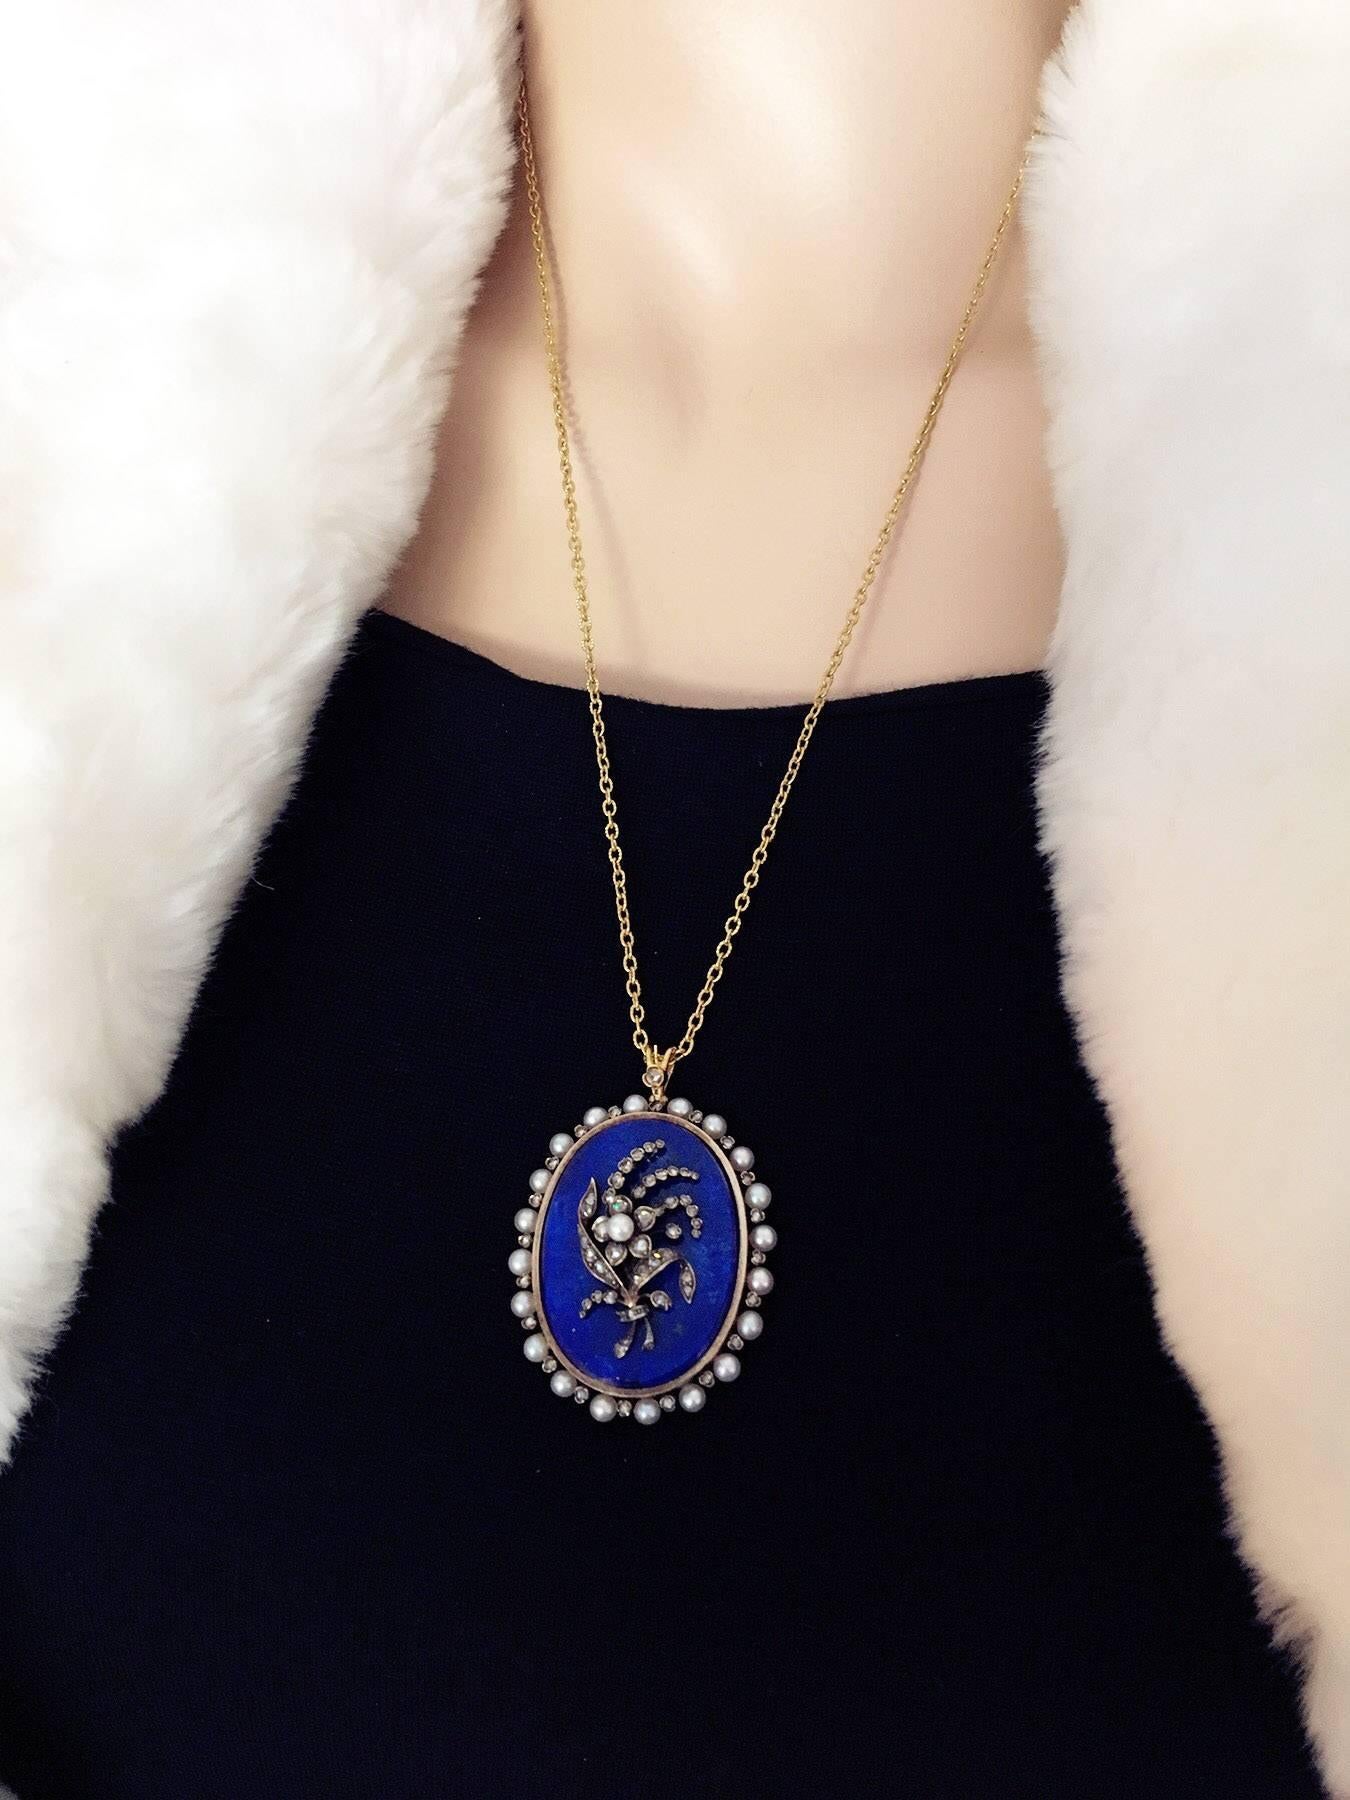 Women's or Men's 18K Gold Early 20th Century Lapis Lazuli Rose Cut Diamond and seed Pearl Pendant